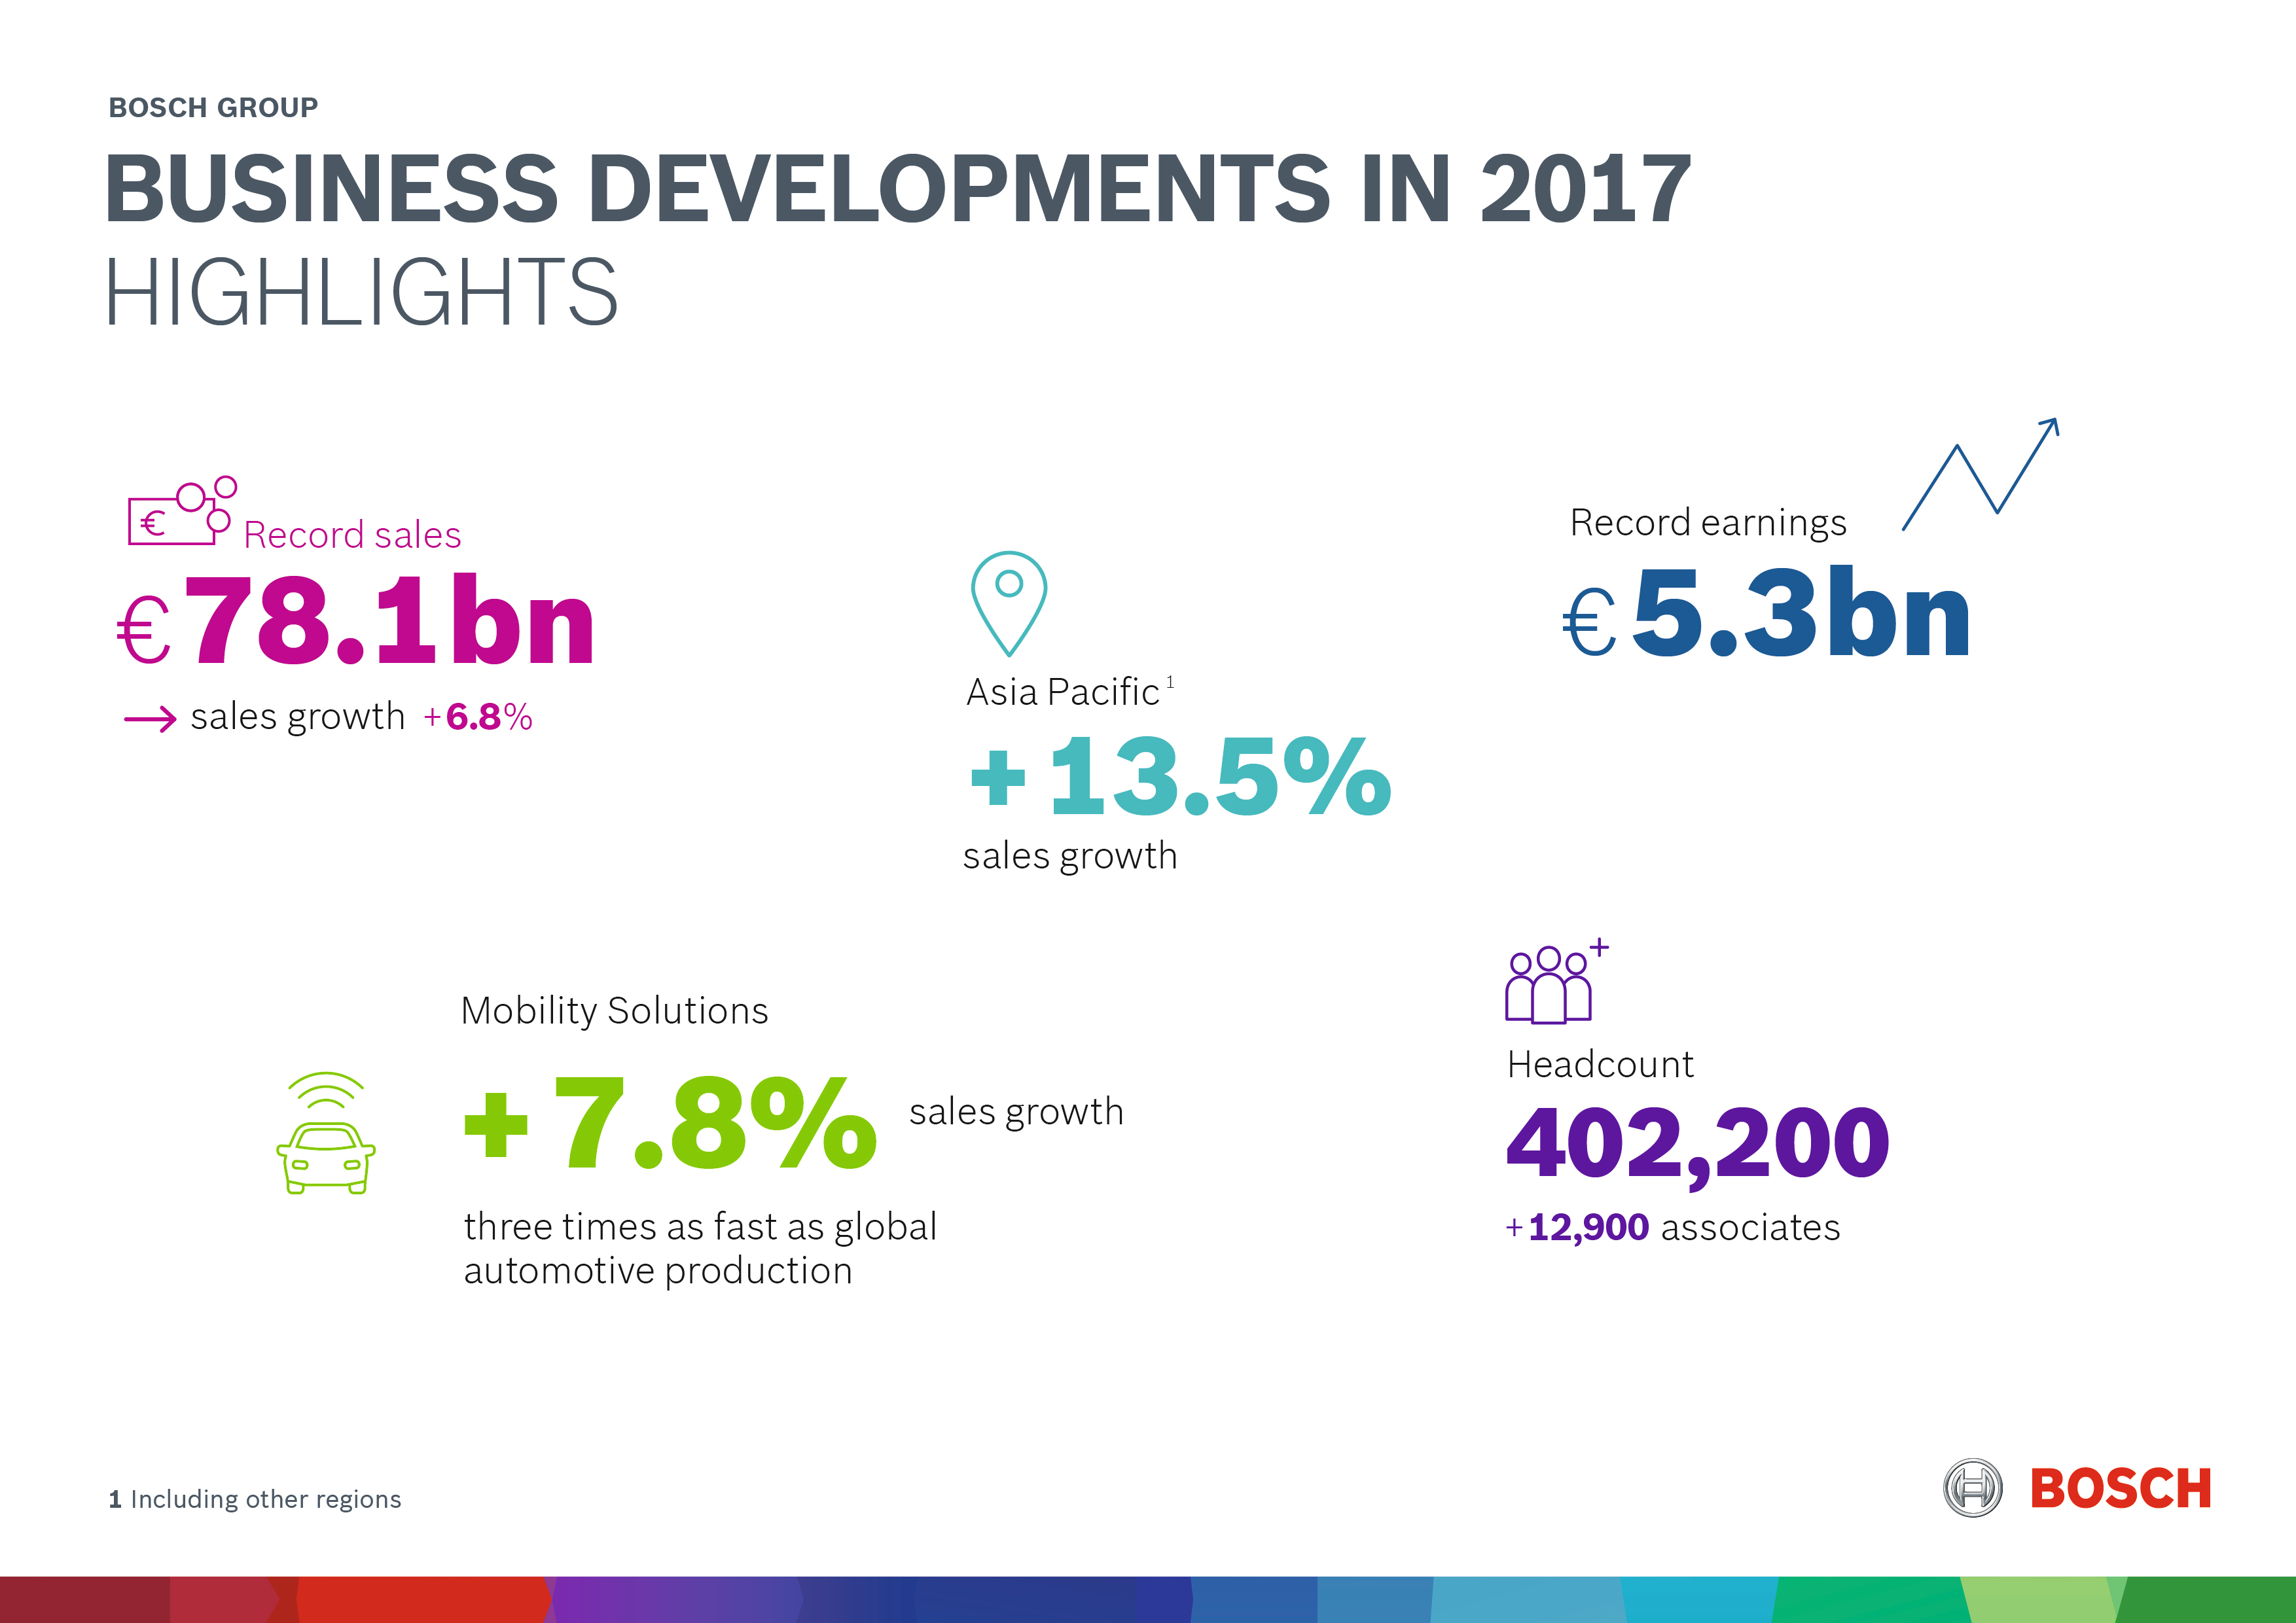 Business developments in 2017 by business sector